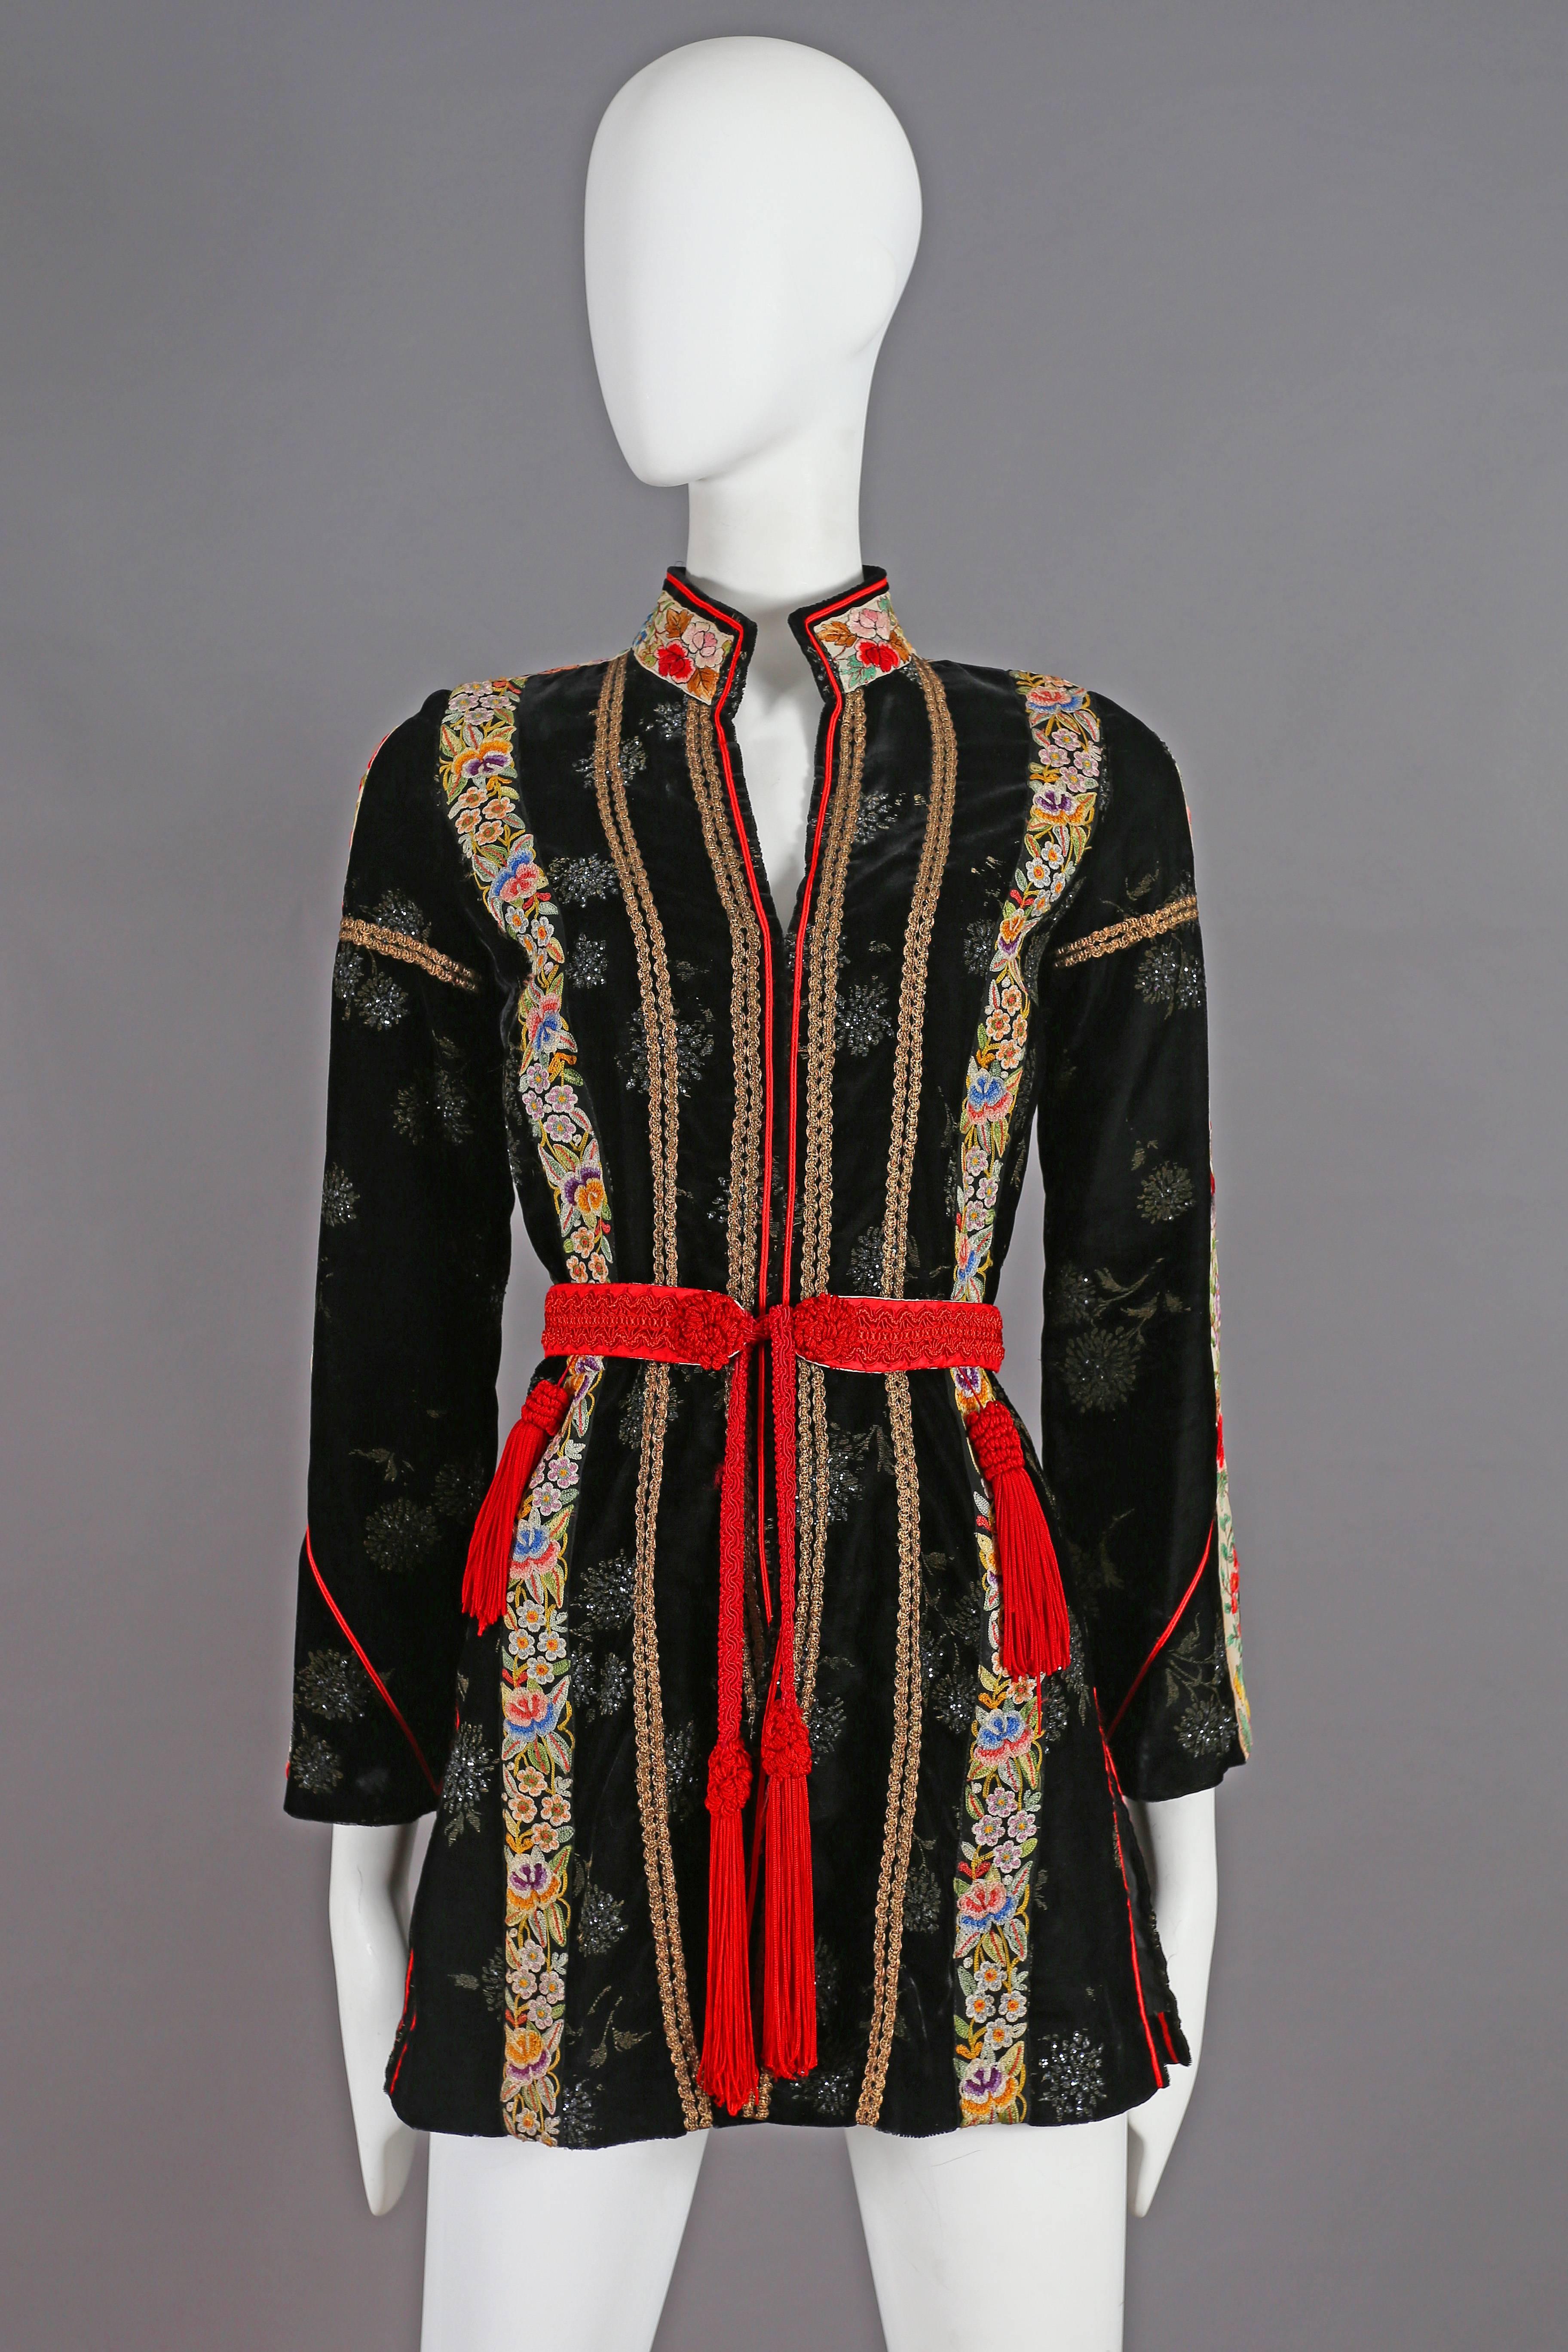 Exquisite and rare Thea Porter Couture black velvet evening jacket with intricate floral embroidered panels, gold lame piping and red waist belt with five tassels. 